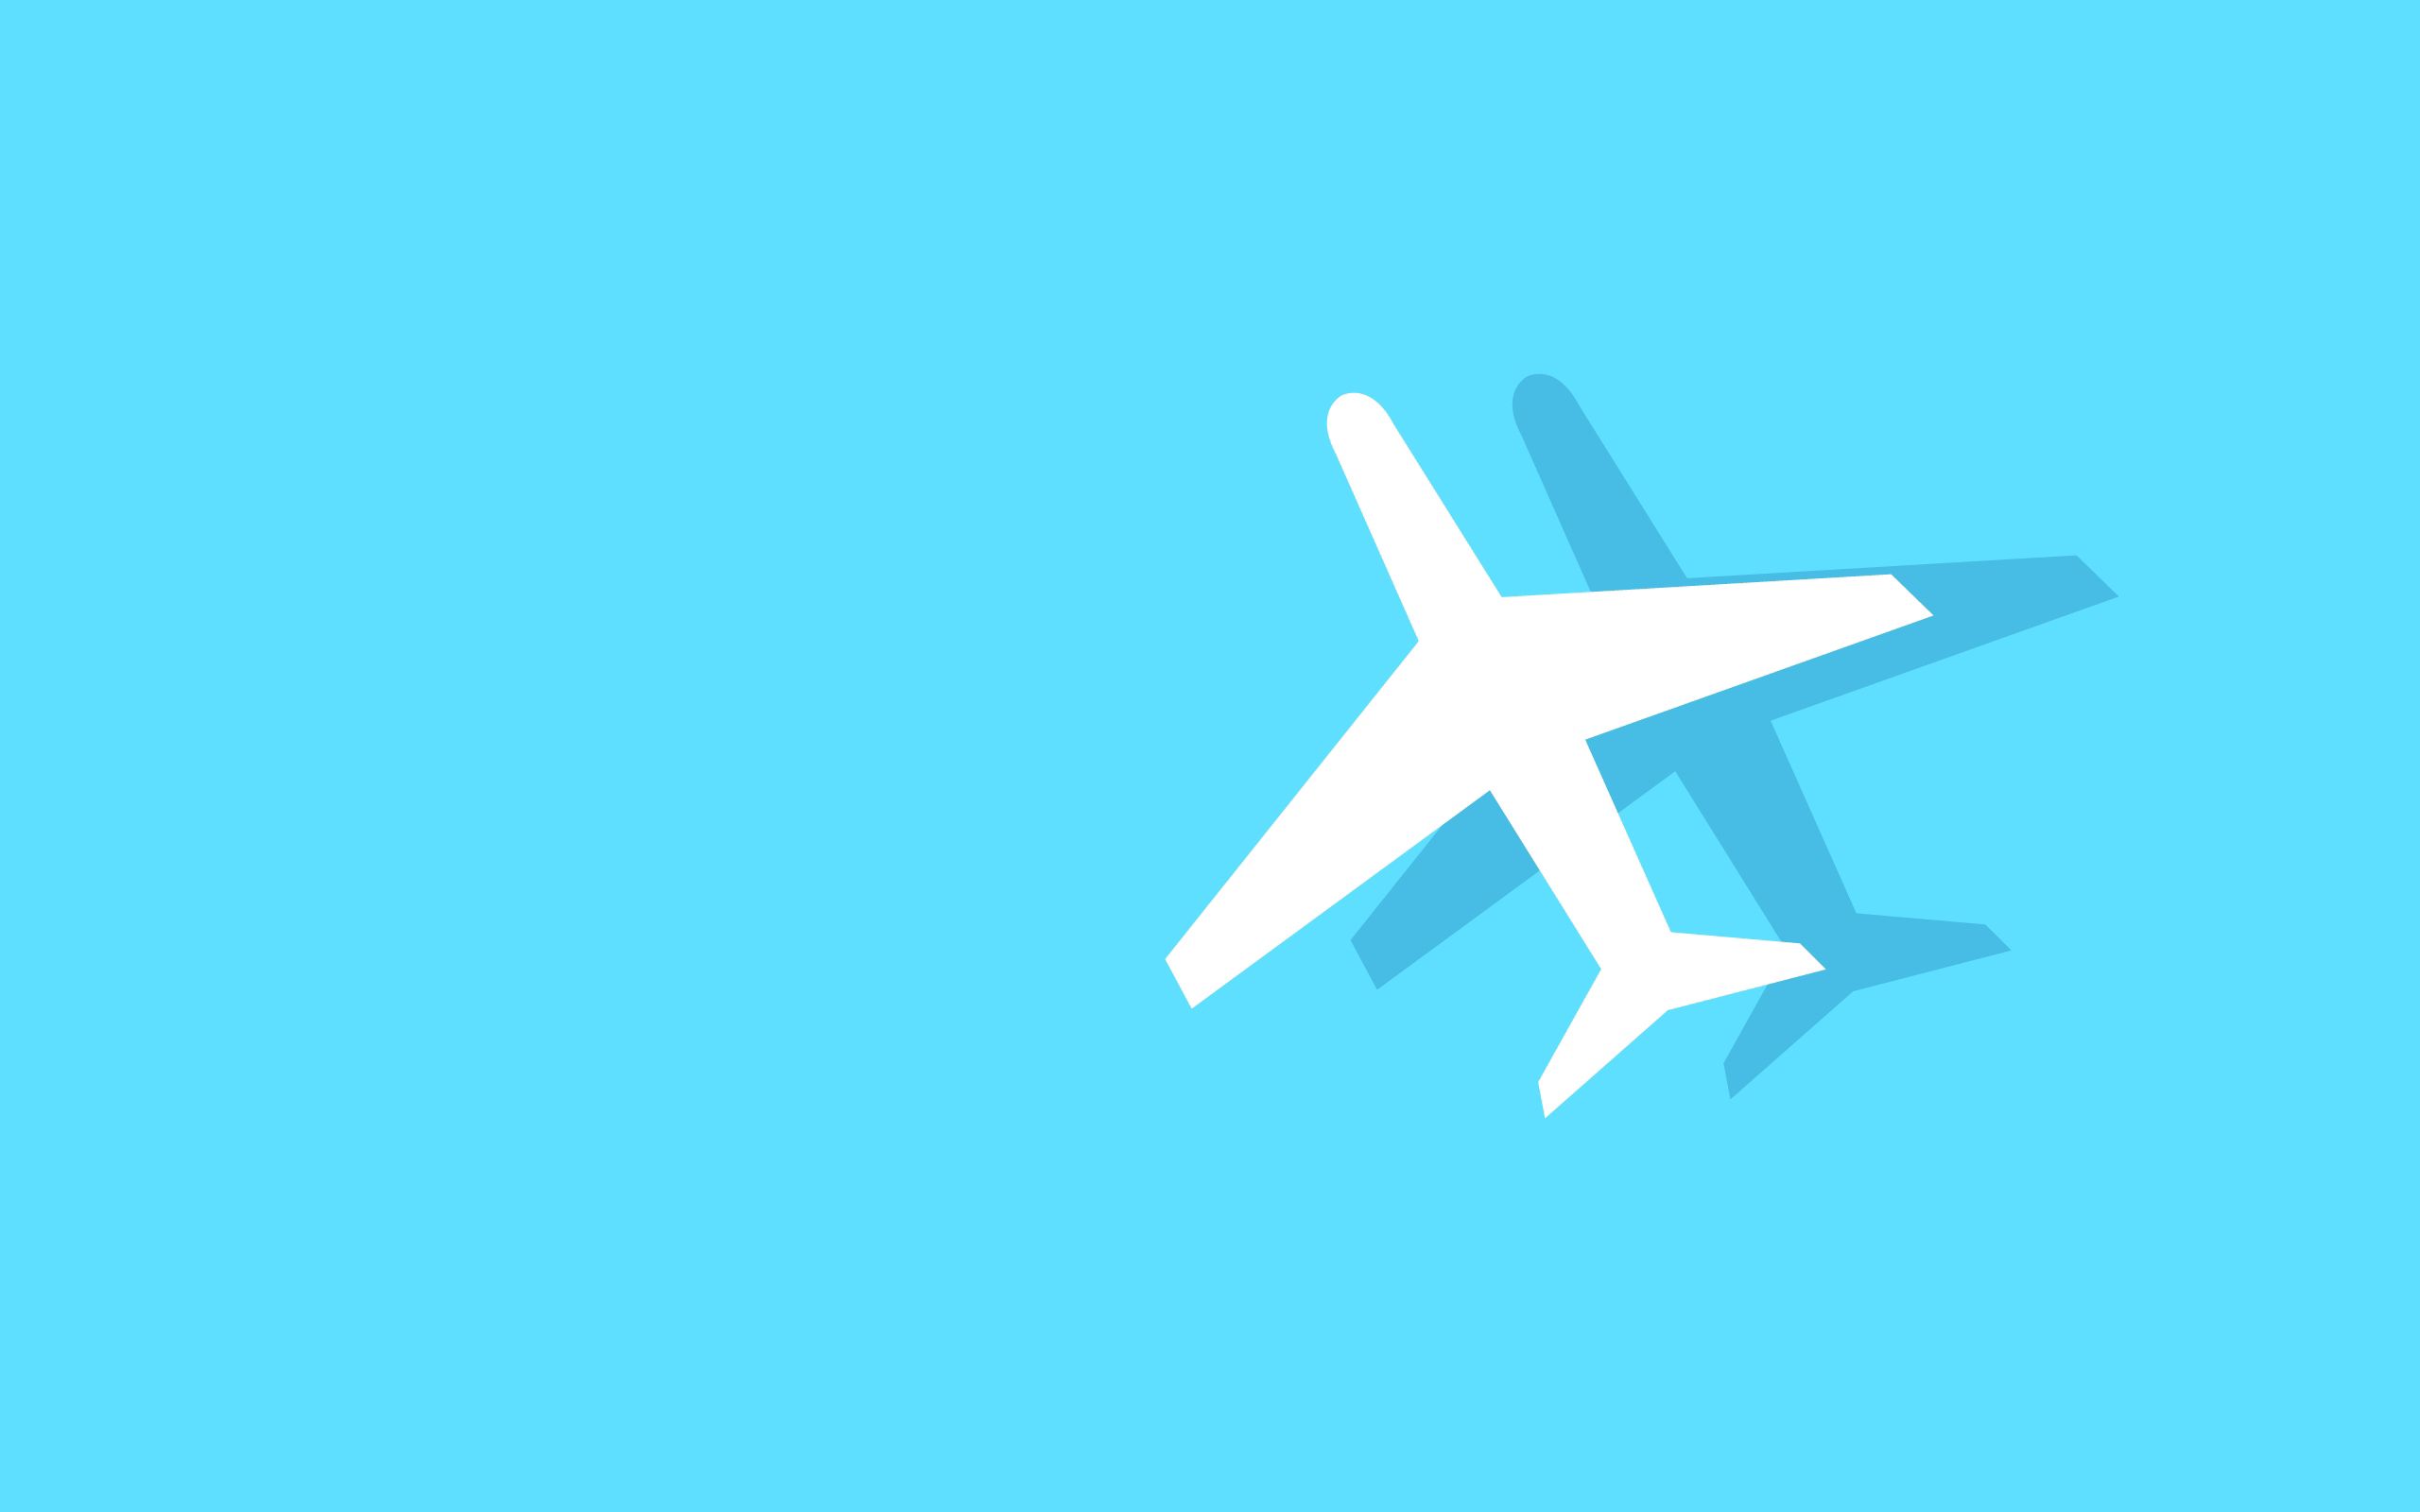 graphics, picture, plane, vector, drawing, shadow, airplane